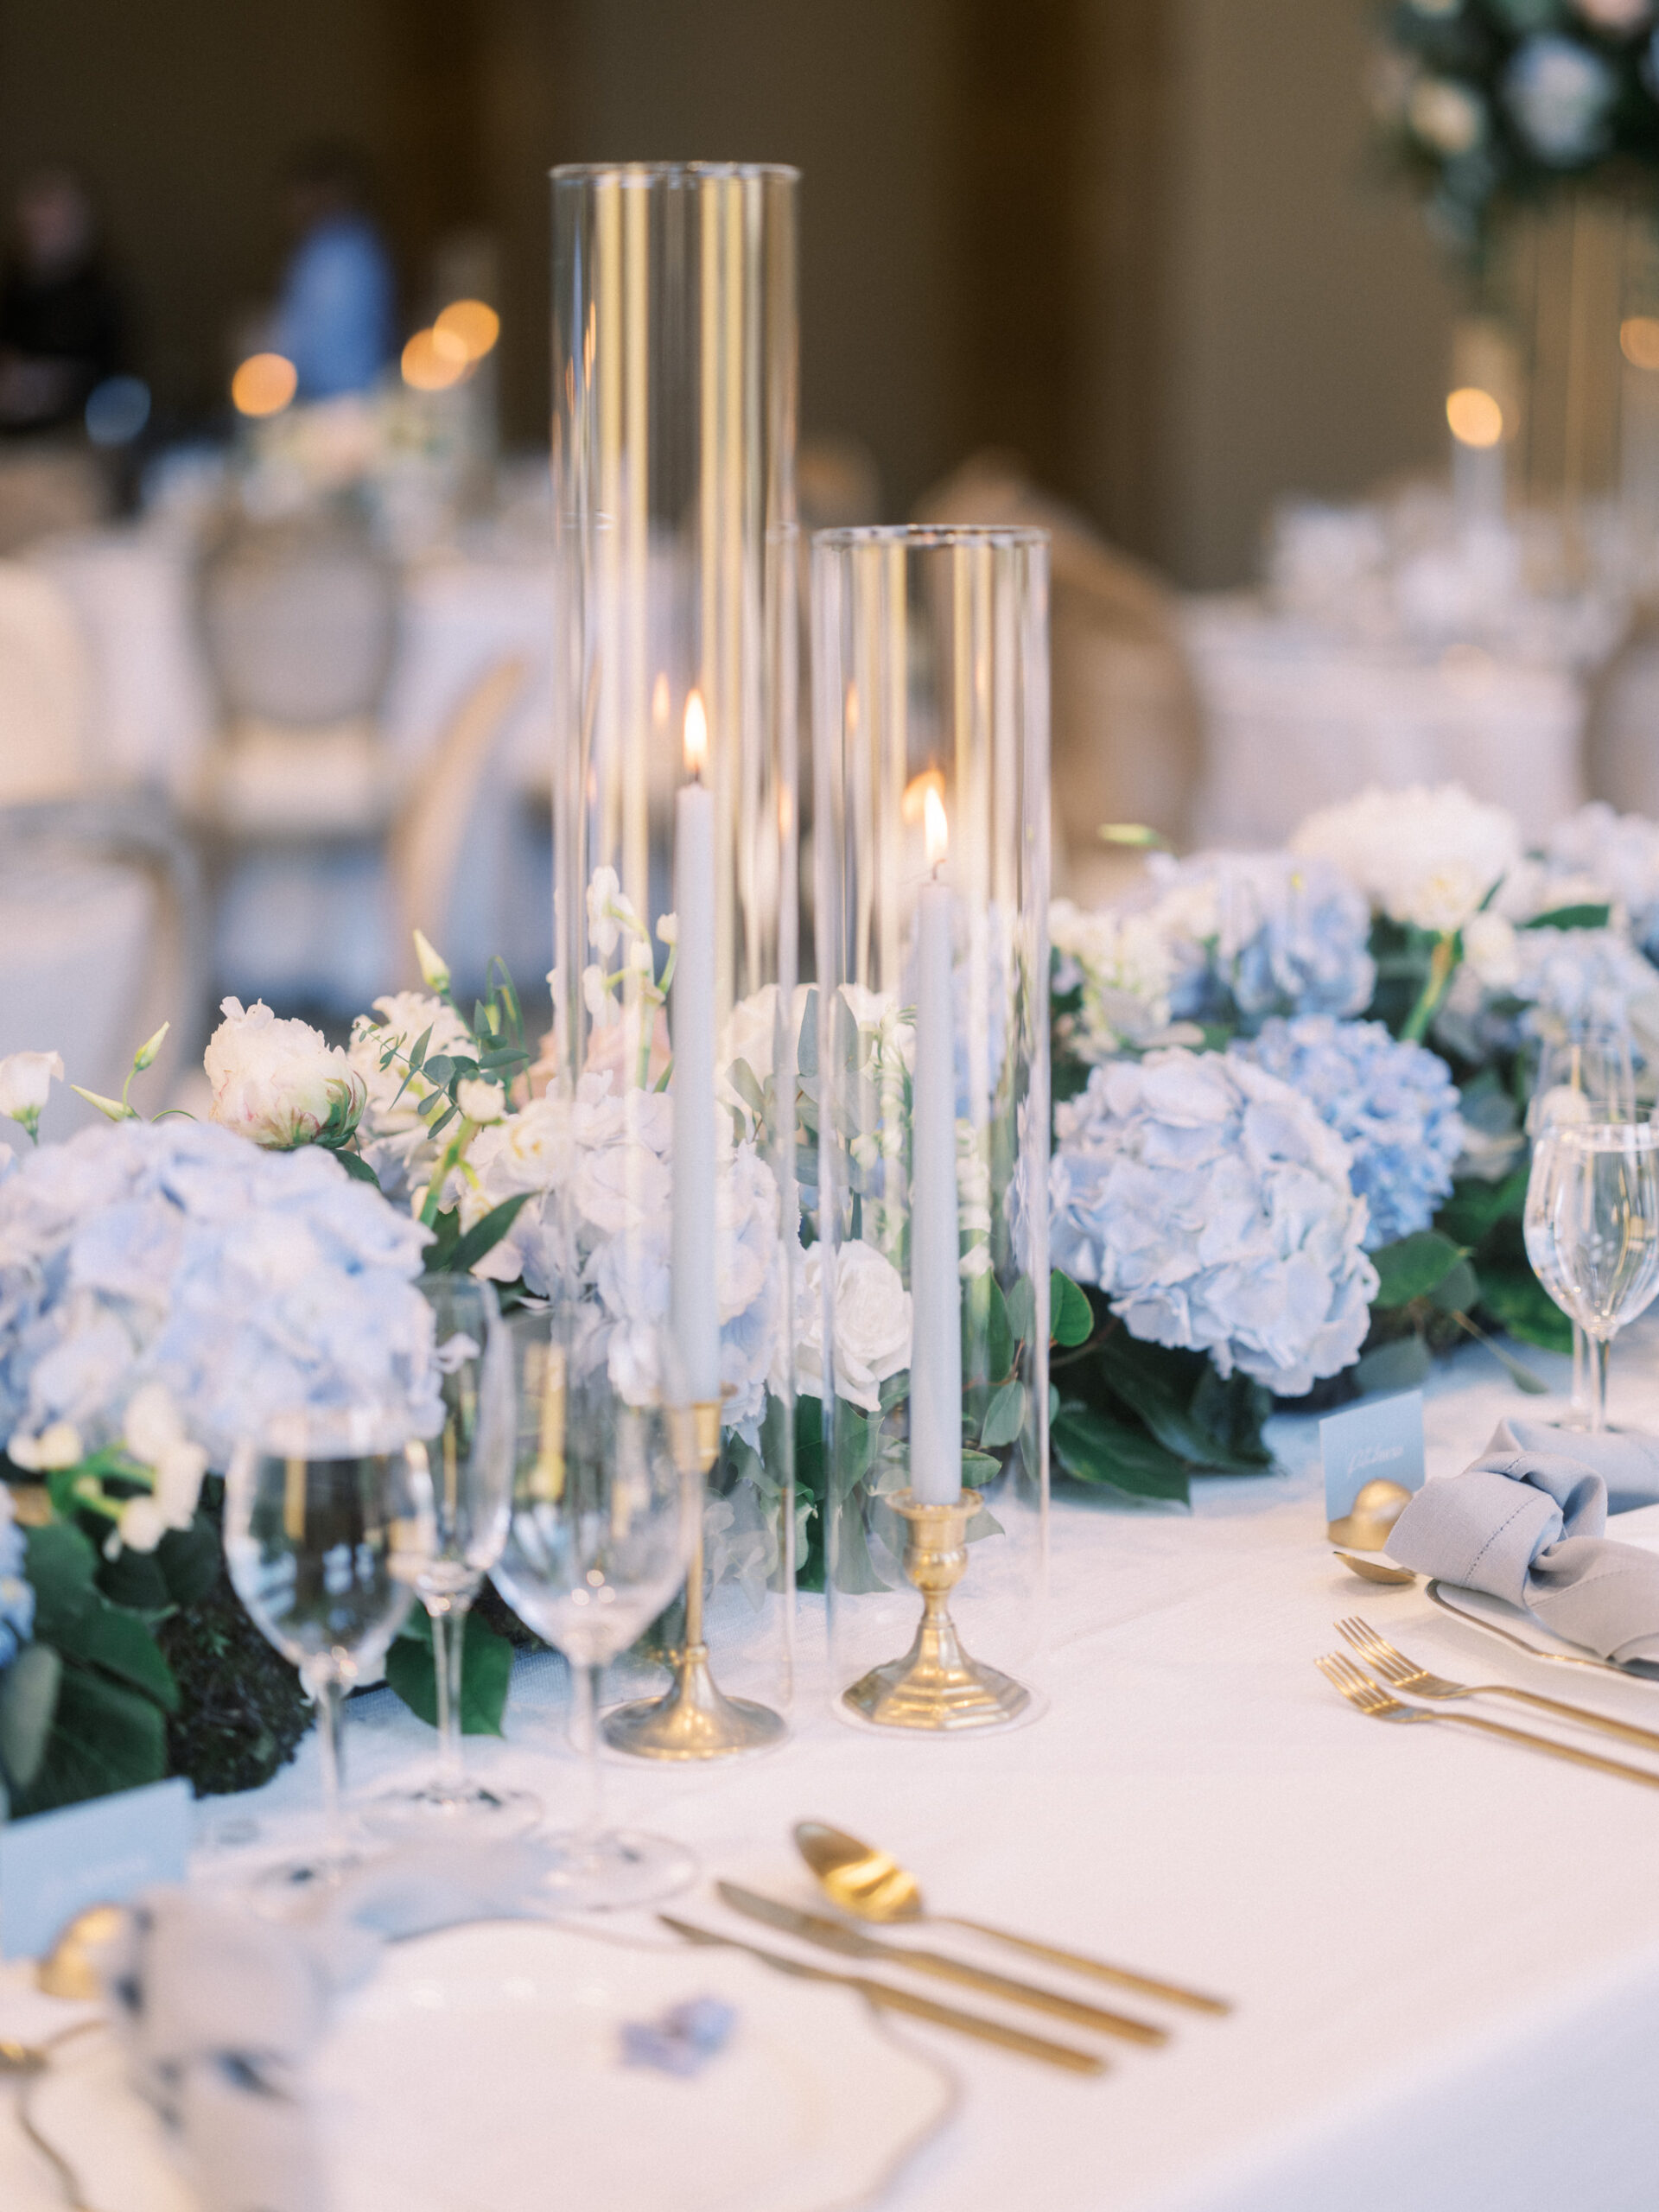 French Blue Parisian Wedding Inspiration, blue tapered candles wedding, gold cutlery, head table florals, bridal table flowers, hydrangea centrepieces, tall hydrangea centrepiece, blue ceremony arch, hydrangea ceremony arch, french wedding, light blue wedding, dusty blue florals, anemones, wedding floral inspo, blue wedding hydrangeas, nicole sarah